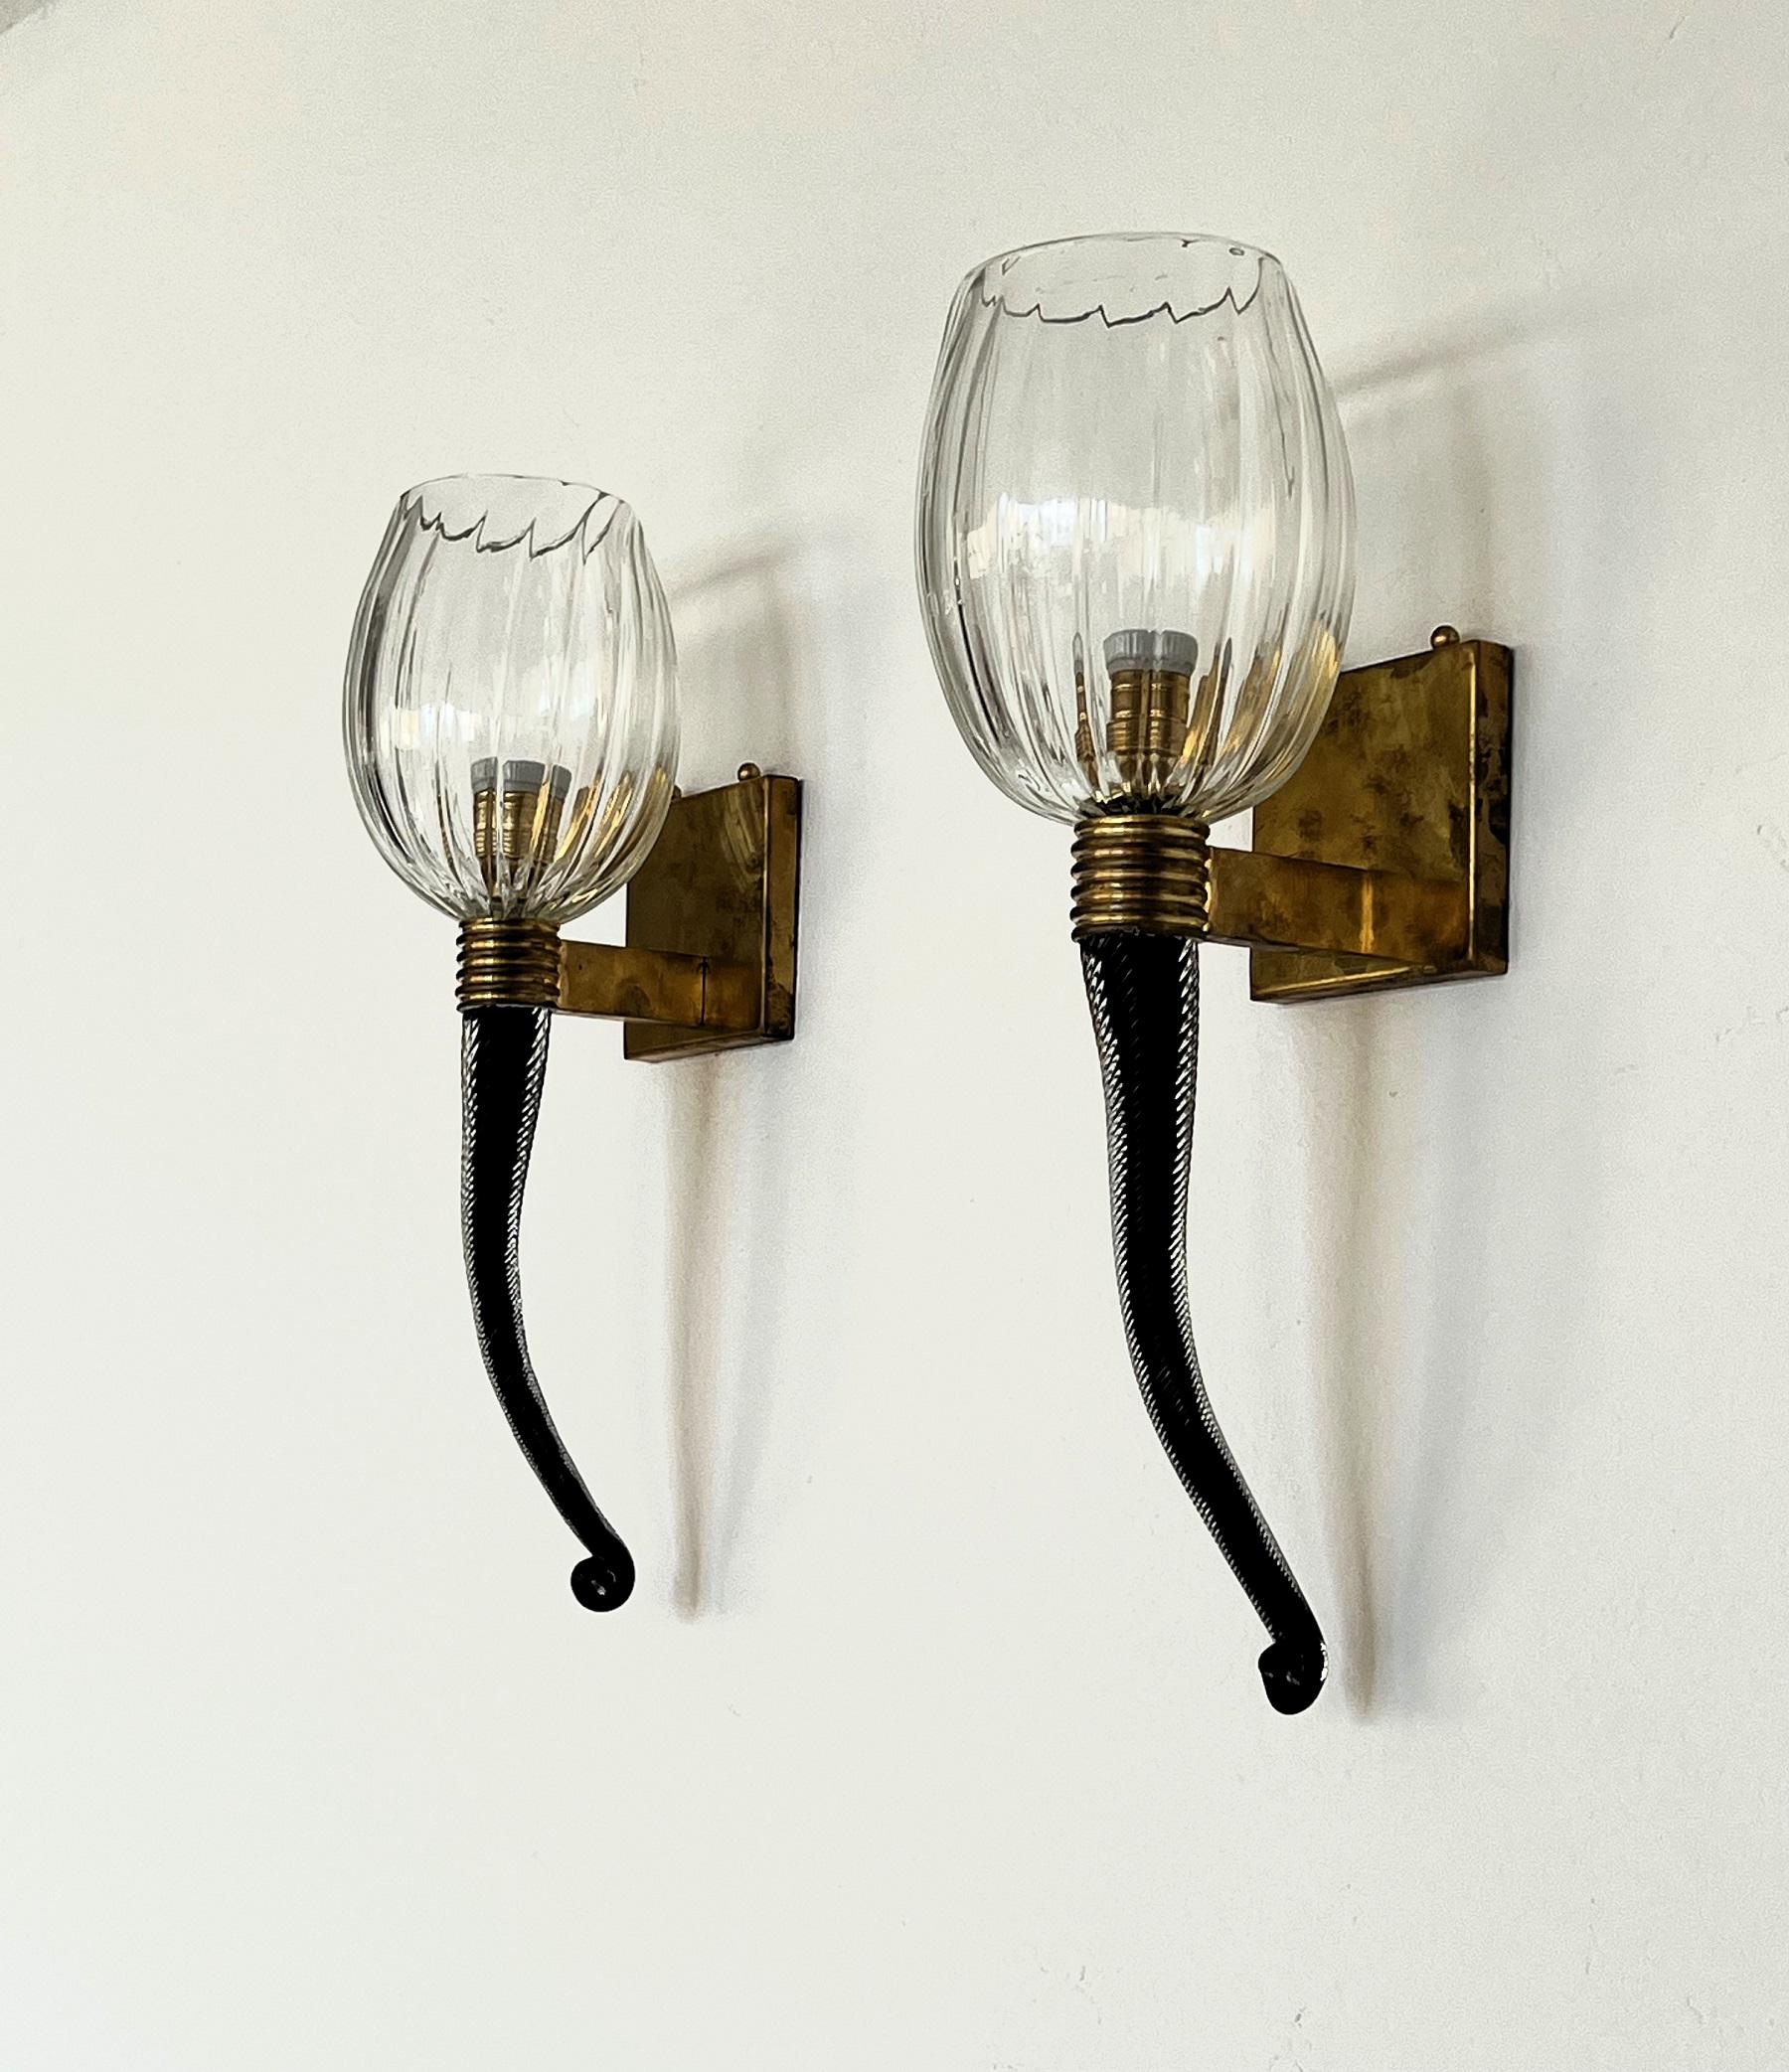 Brass Italian Large Murano Glass Wall Lights or Sconces in Barovier Toso Style, 1990s For Sale